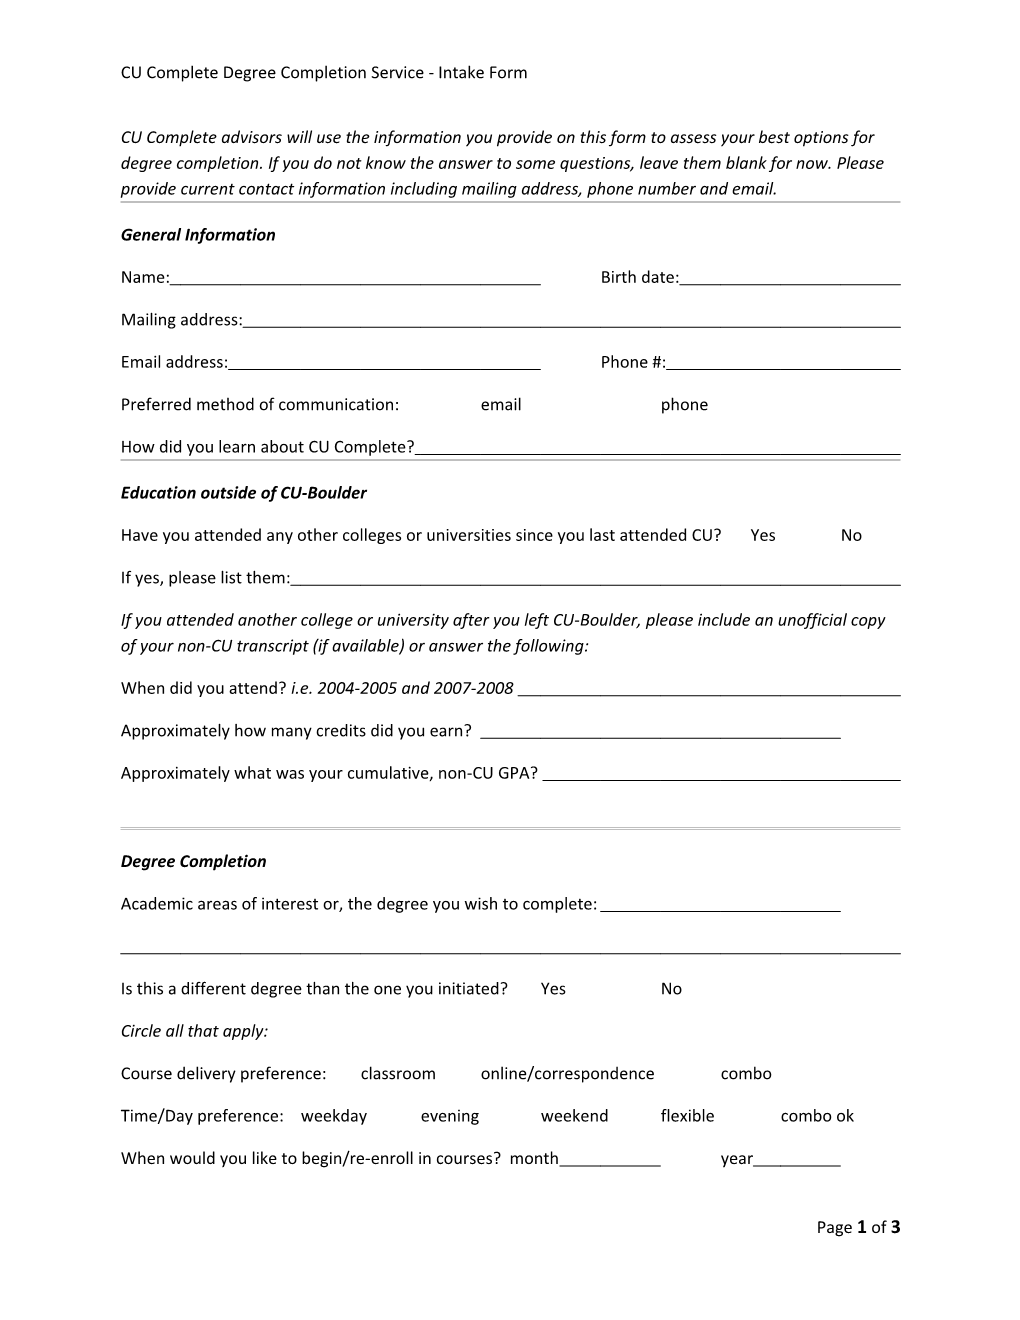 CU Complete Degree Completion Service - Intake Form